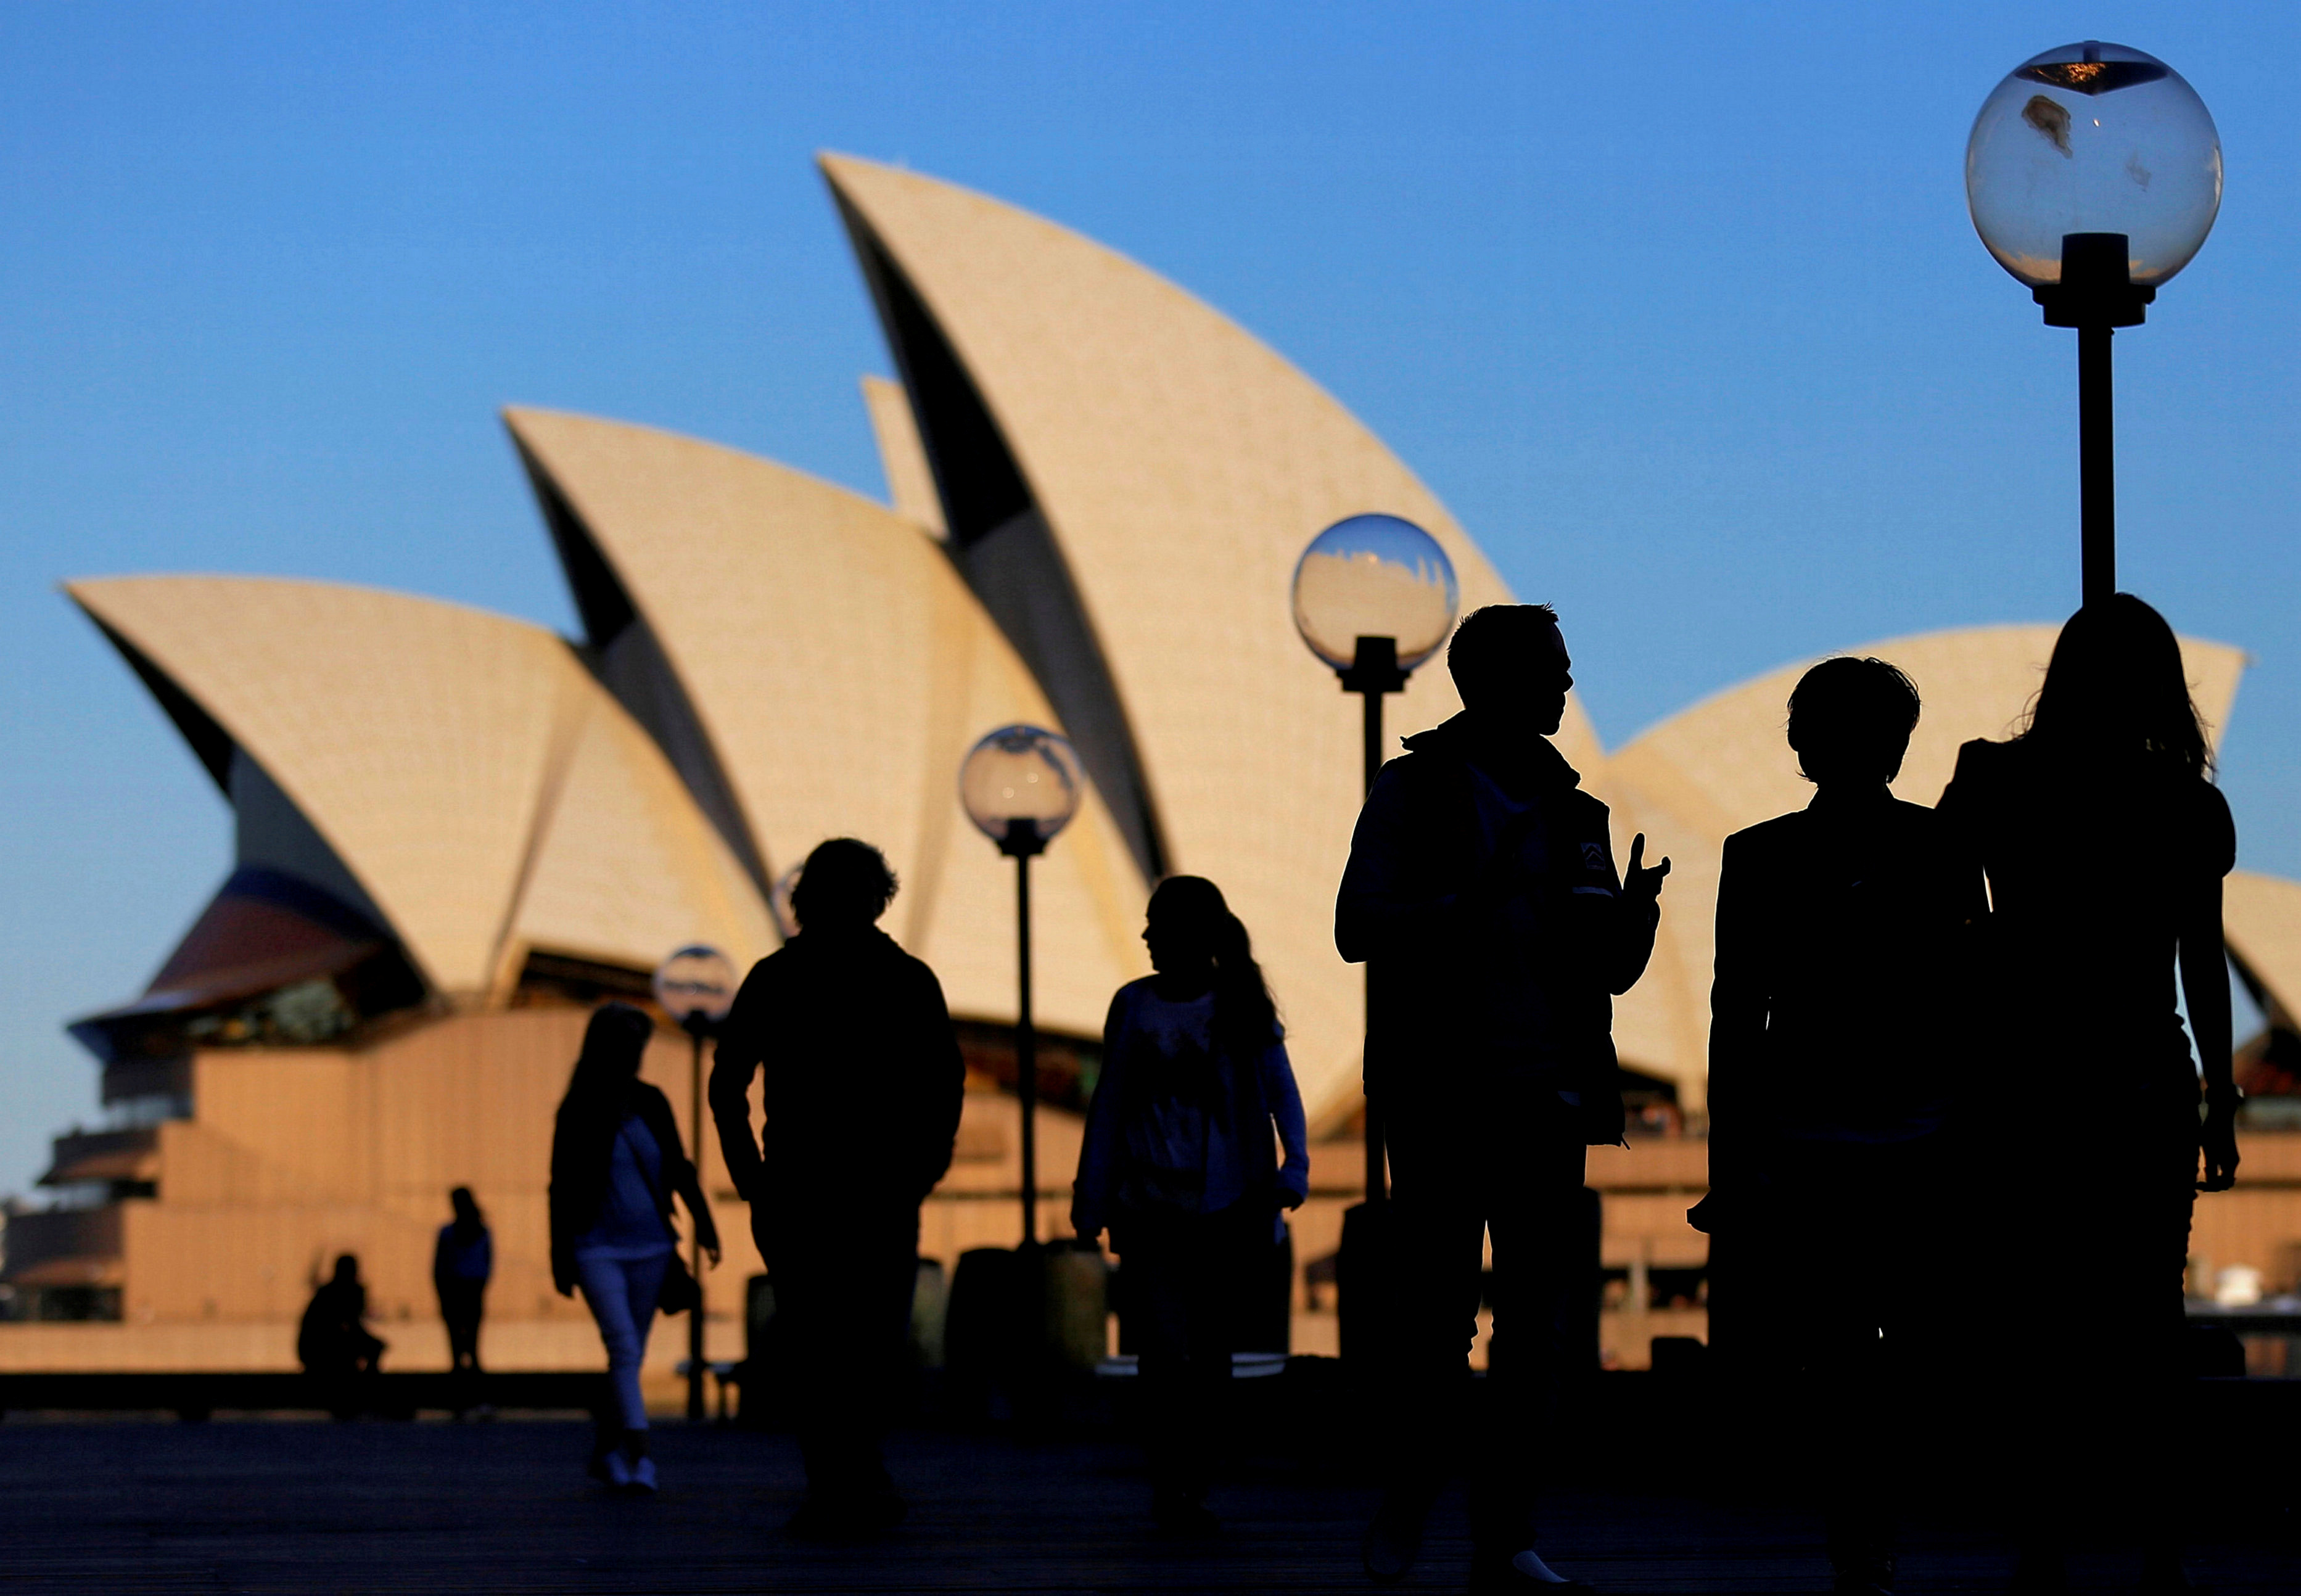 People are silhouetted against the Sydney Opera House at sunset in Australia